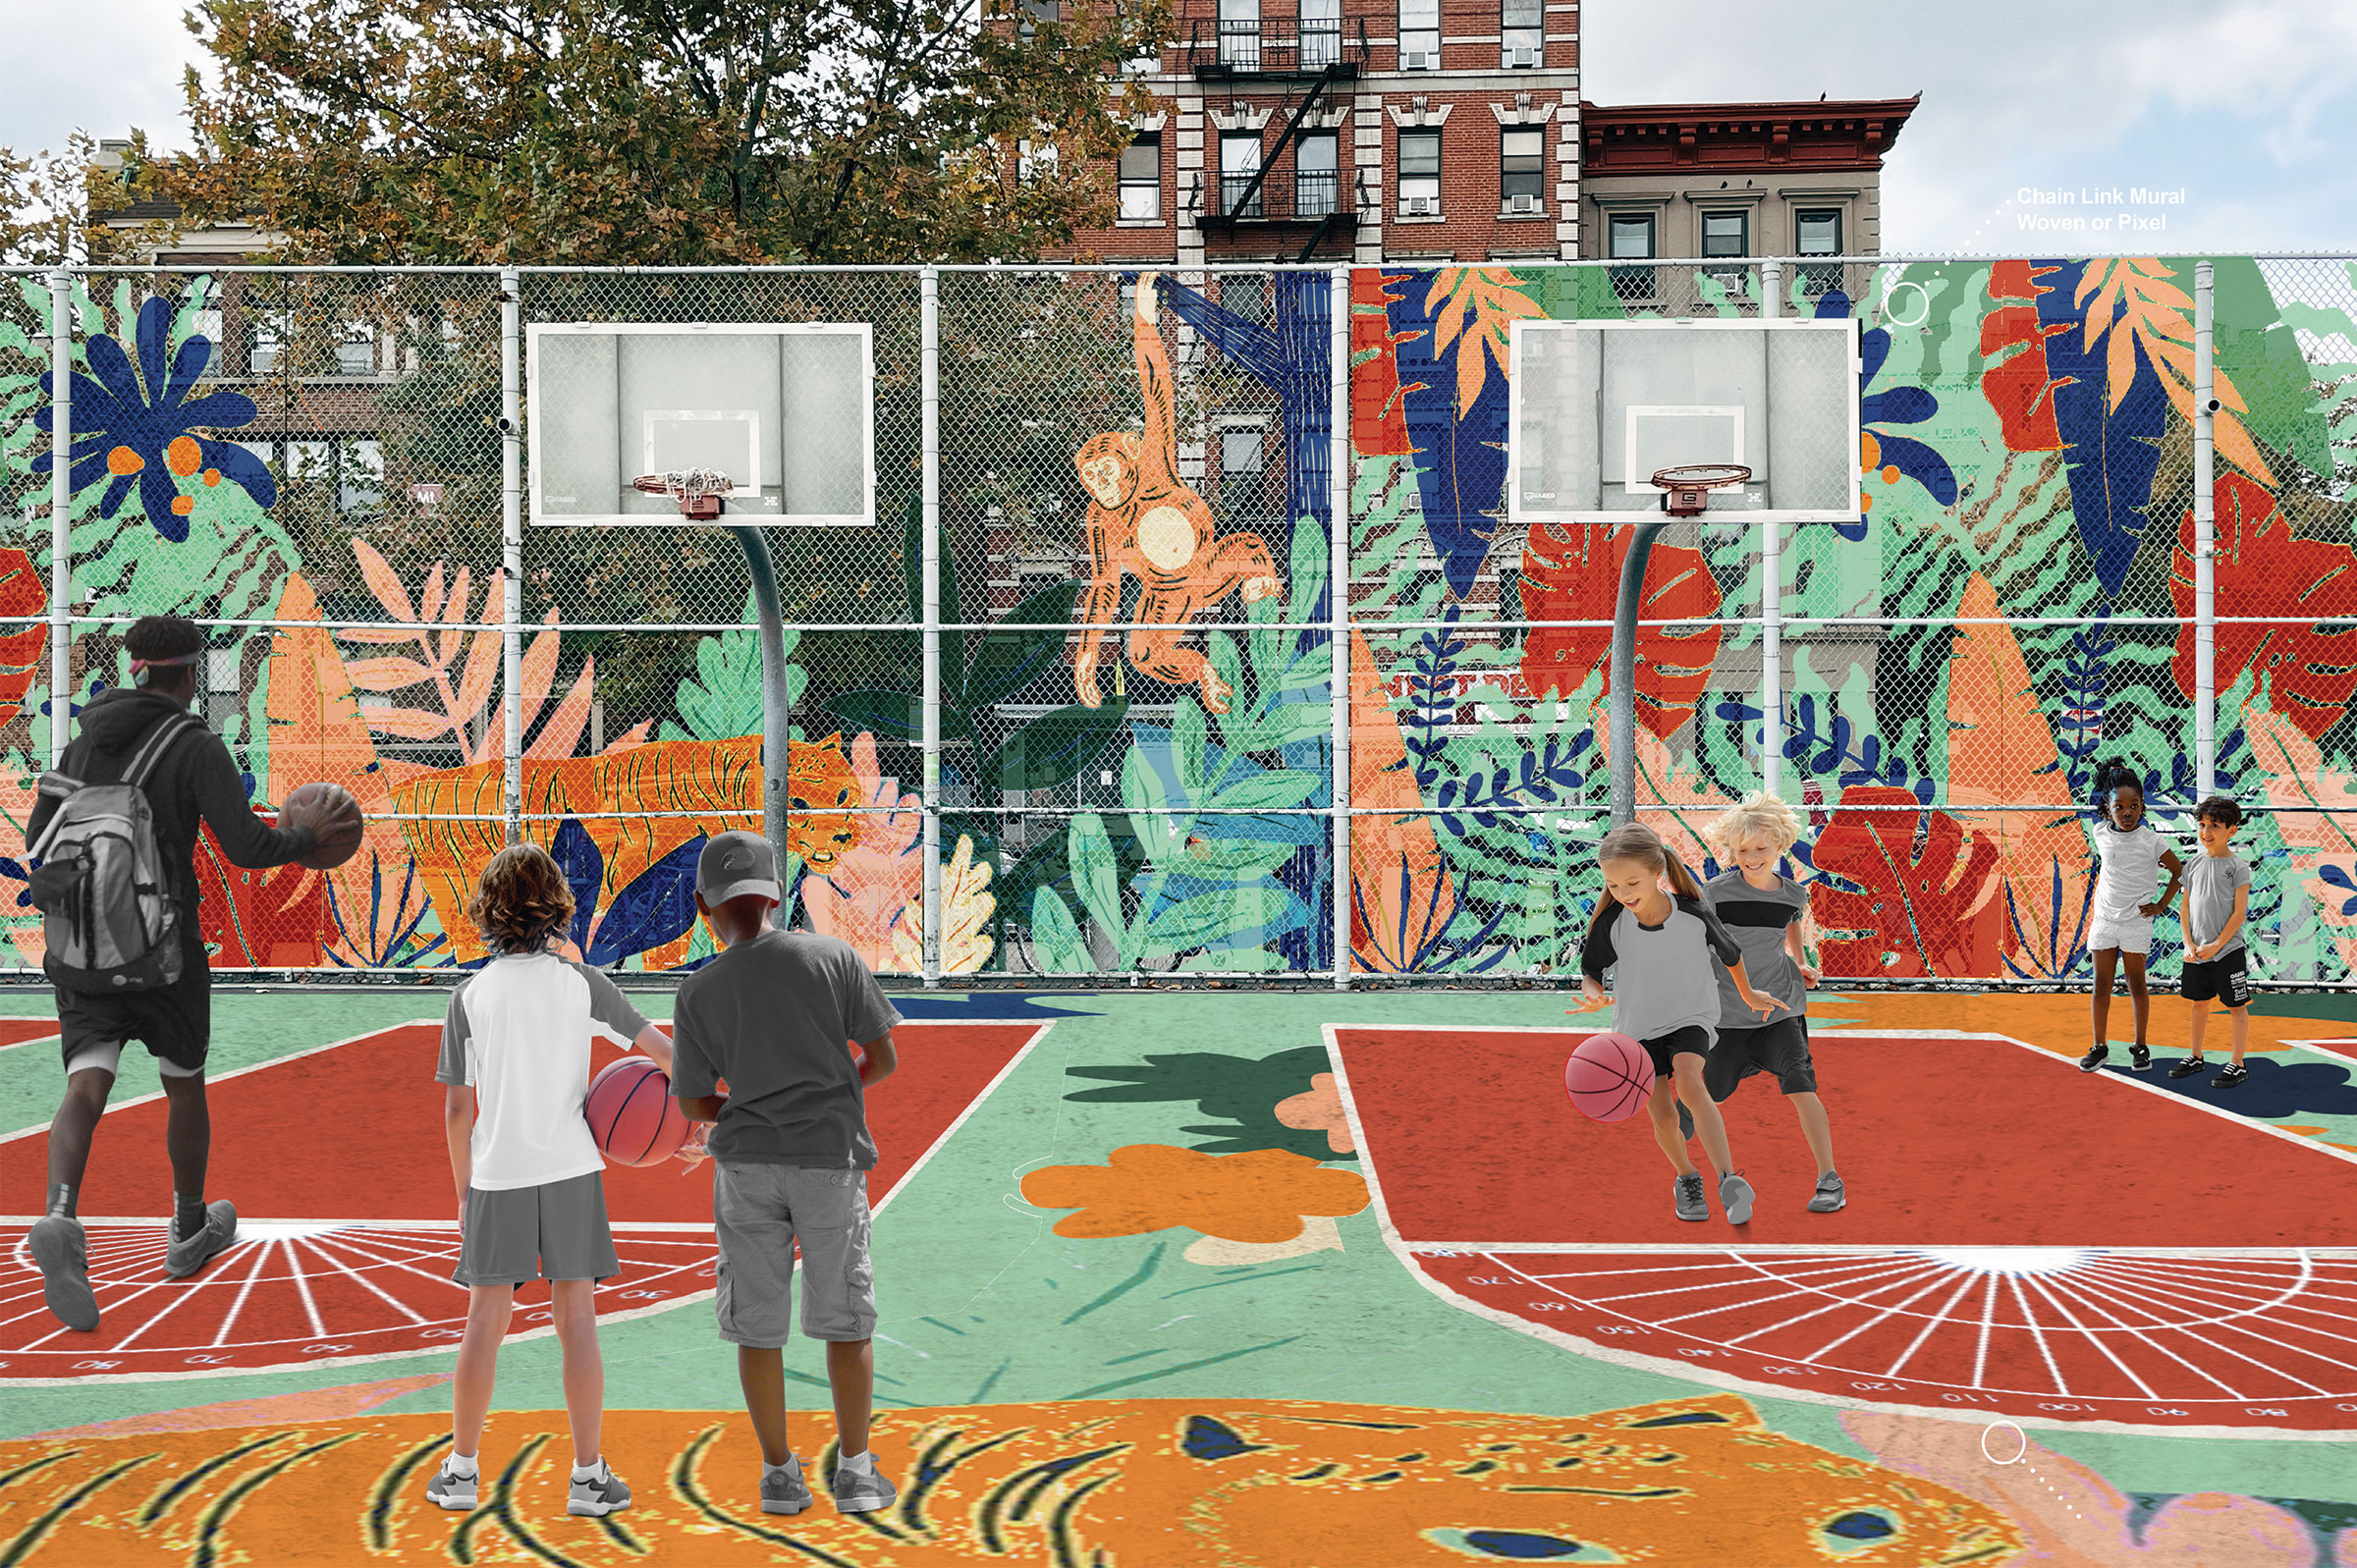 Basketball court from the Learning Scapes case study for PS/MS206 by Pratt students Patrick Suh, Gwen Emery, Pan Niruttisard, Ruiyi Zheng, and Zlatan Wang